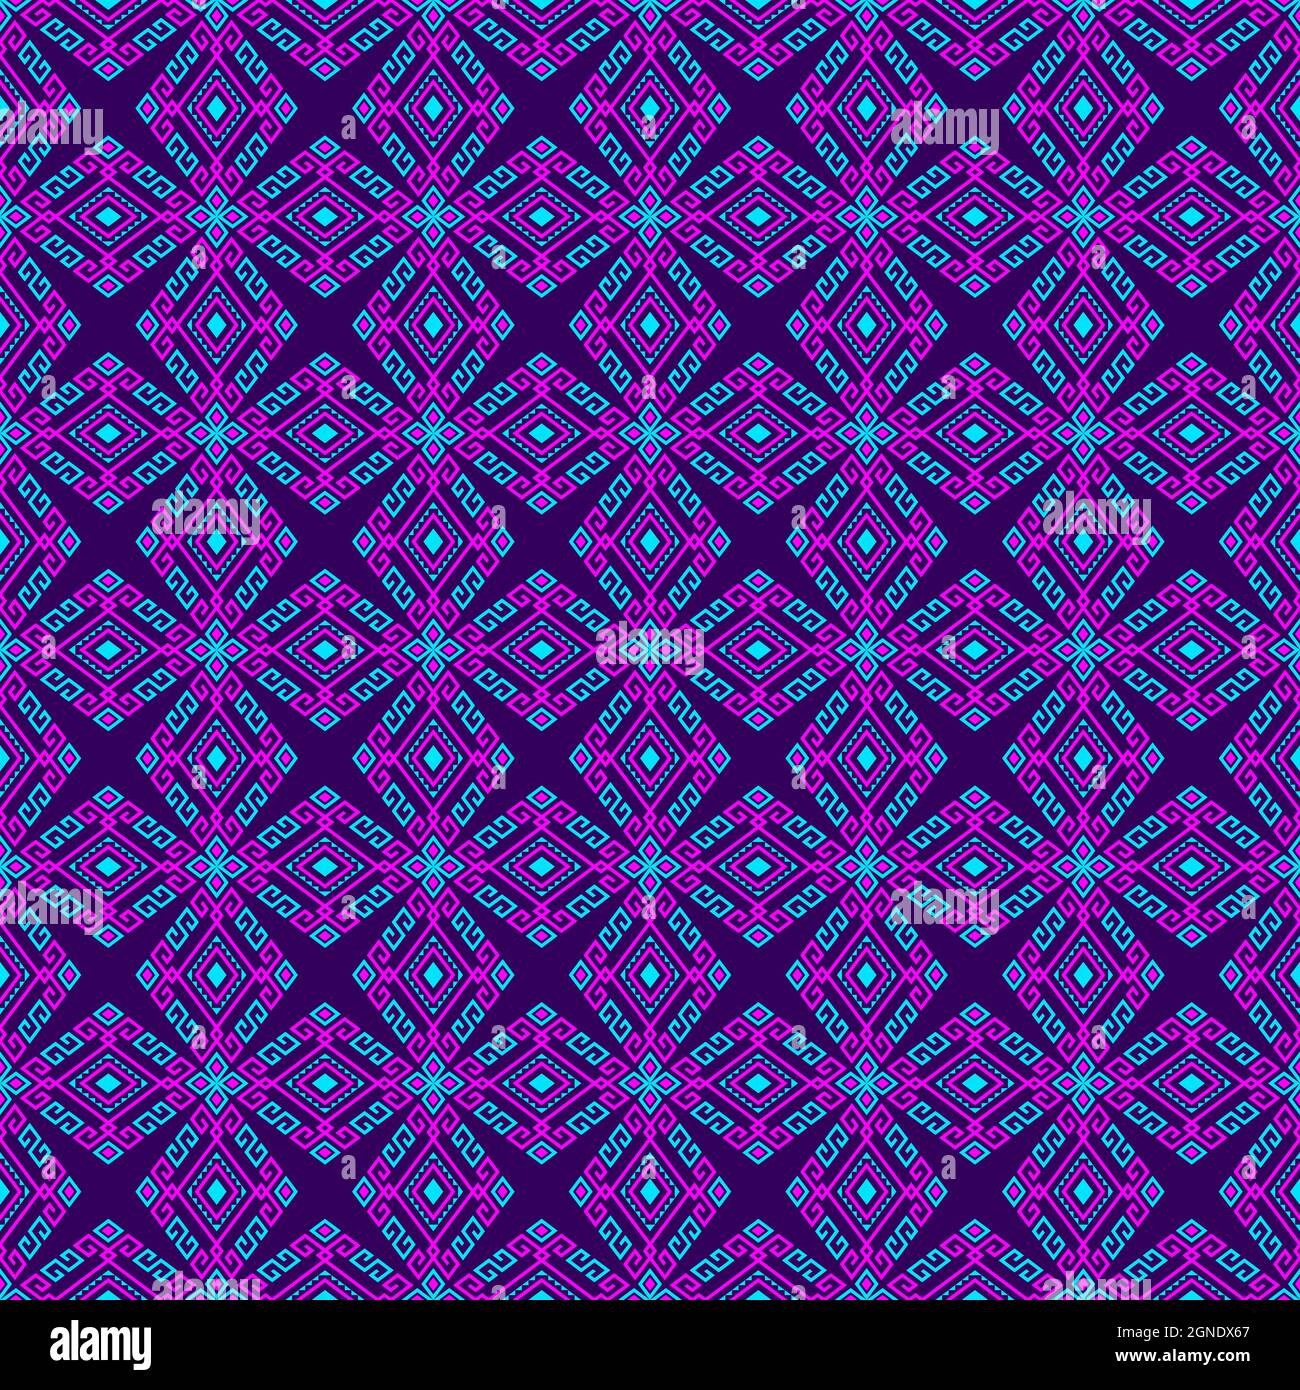 Magenta Turquoise Tribal or Native Seamless Pattern on Purple